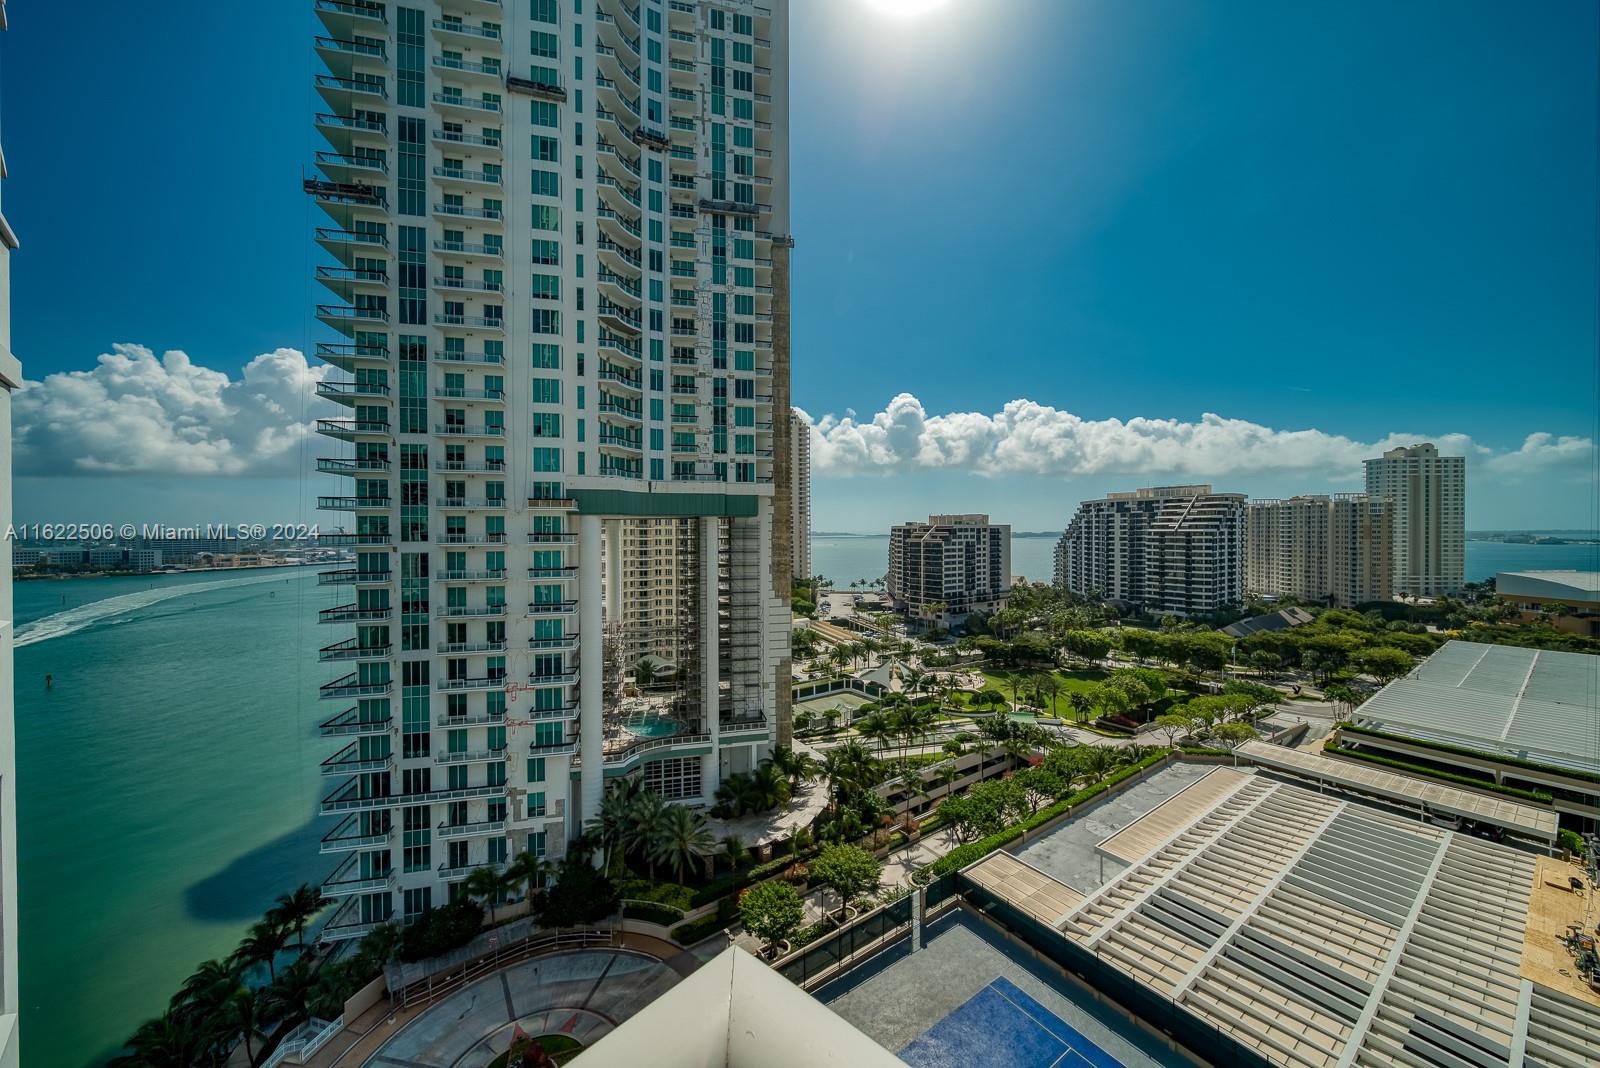 Magnificent bay front condo in Carbonell at Brickell Key offers 2 bedrooms, 2 1/2 baths, laid over 1,418 SqFt.
Marble flooring through-out, volume ceilings, custom walk-in closets, spacious kitchen w/ Miele & Subzero
appliances. Building amenities include: Complementary Valet for guests, tennis courts, pool, gym, sauna,
basketball/racquetball court.